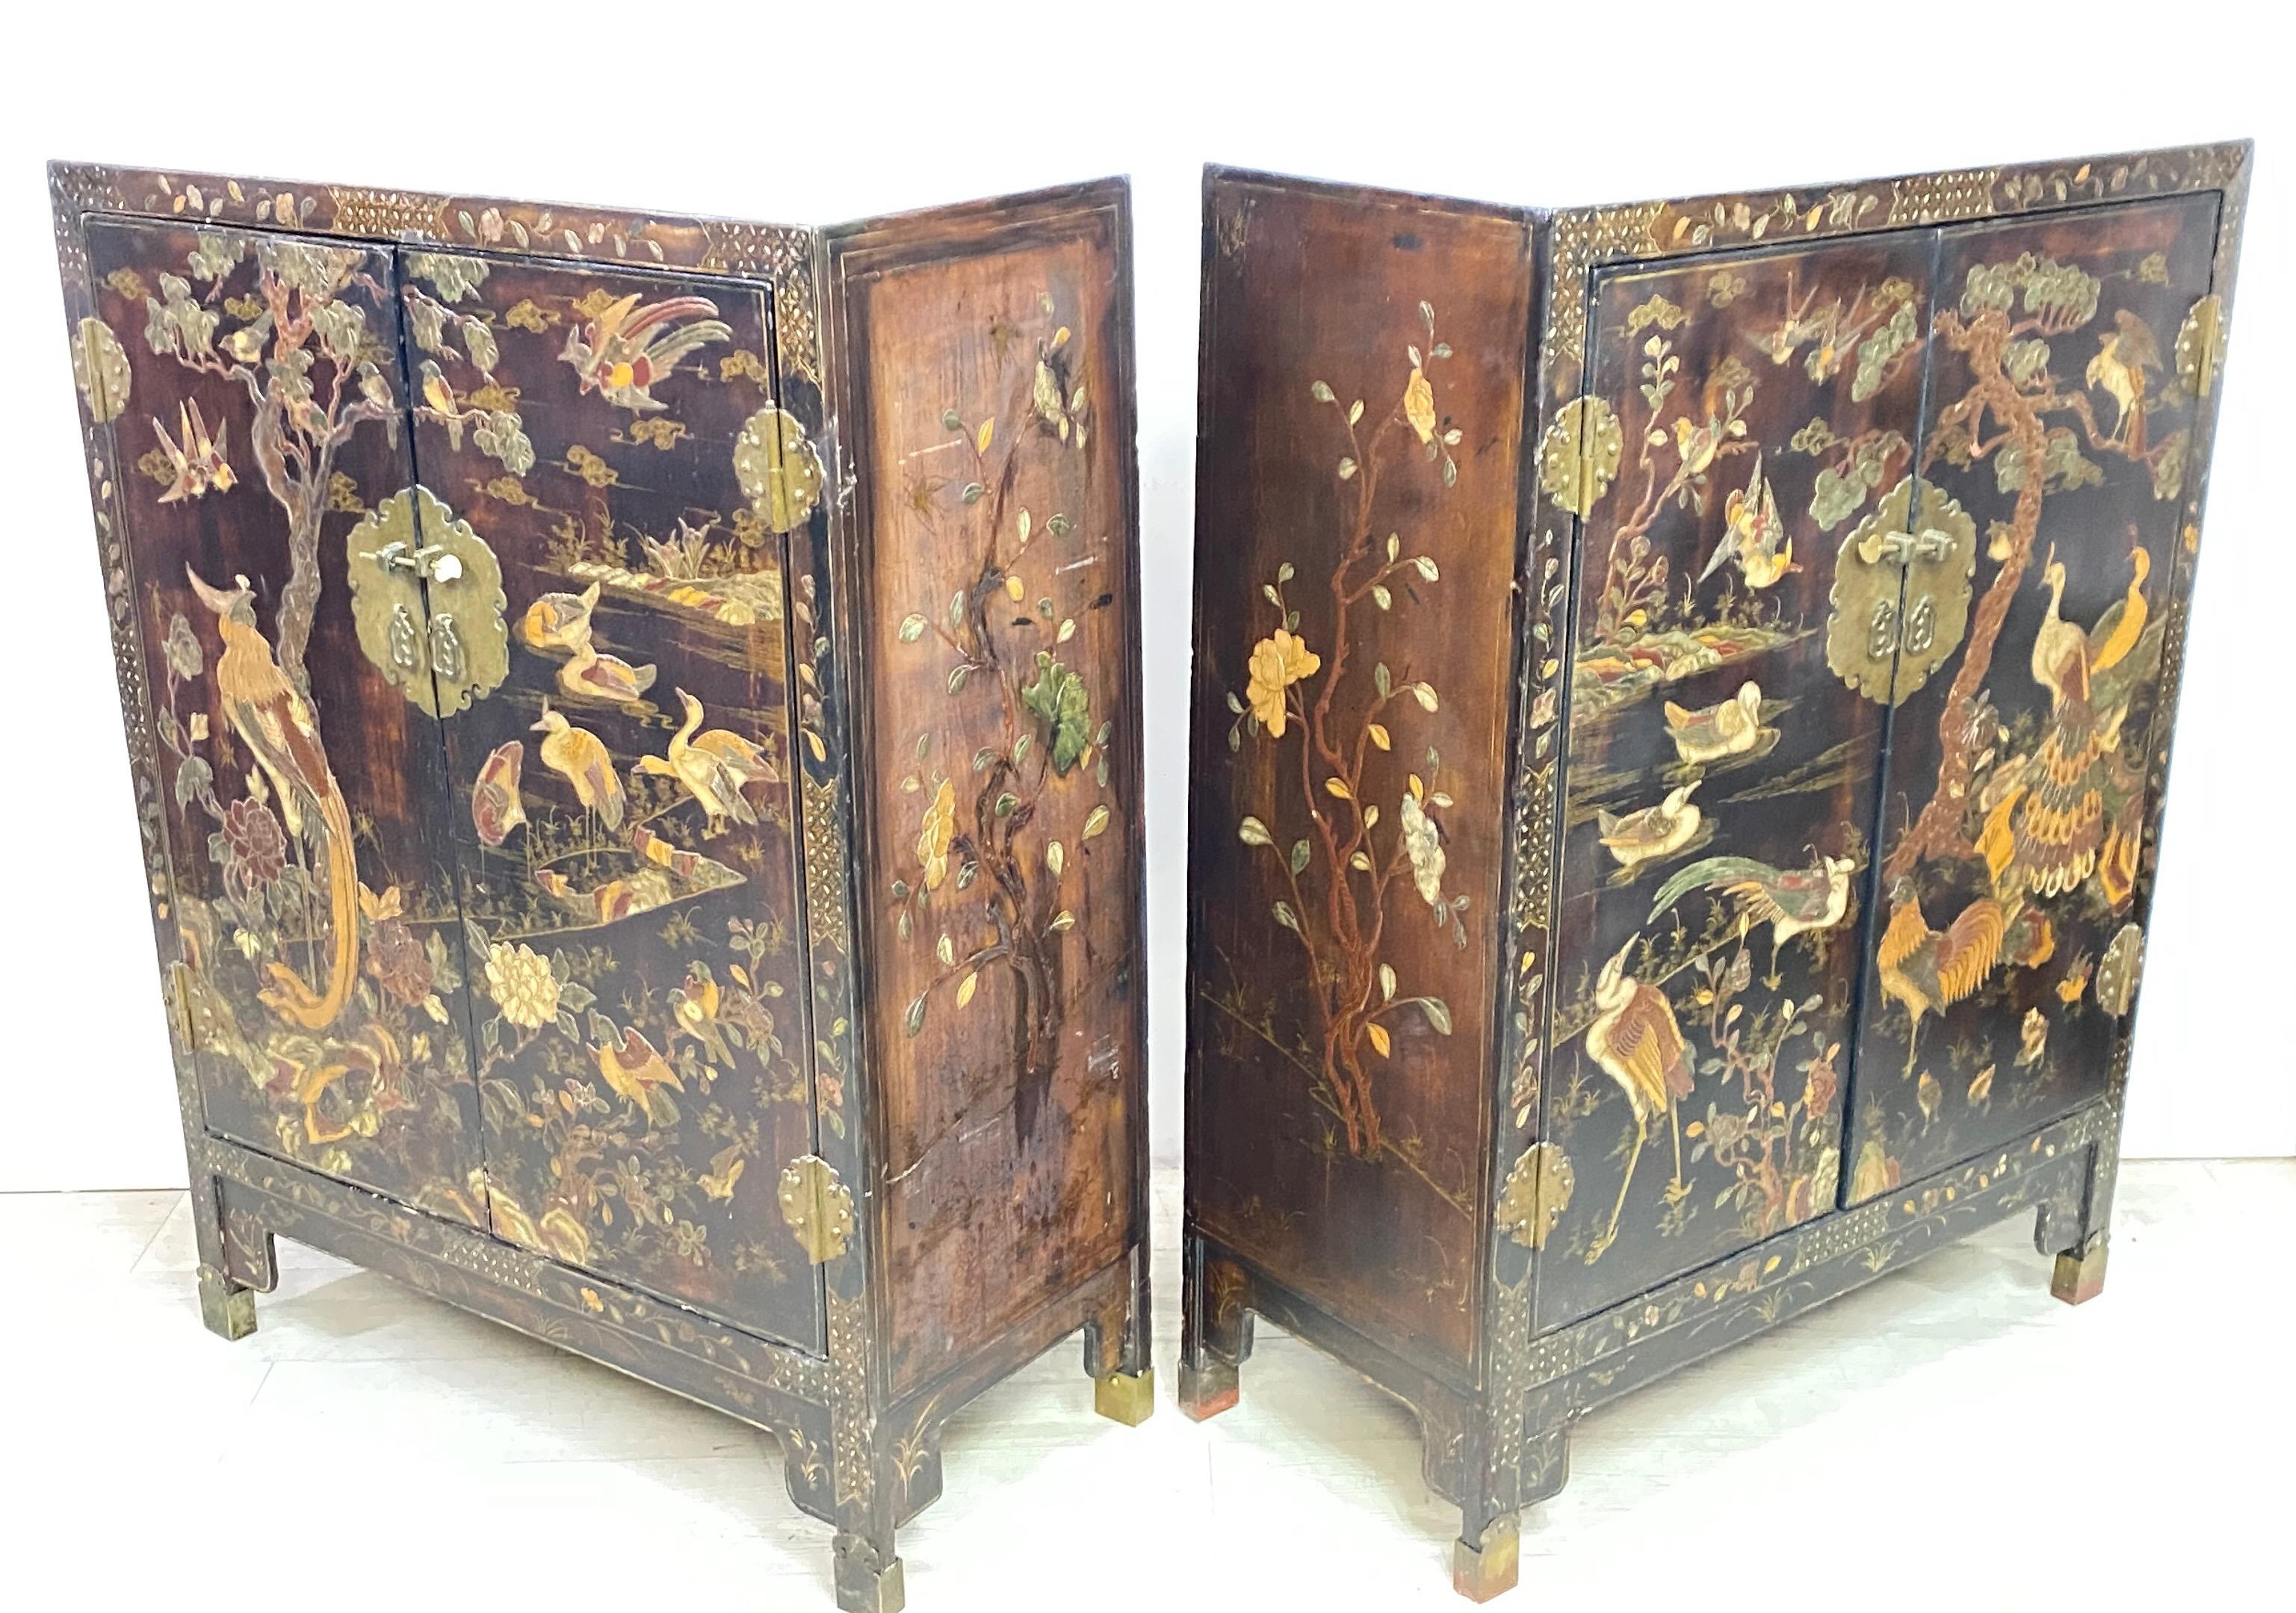 Excellent pair of Chinese lacquered cabinets or nightstands decorated with hardstone and mother of pearl carvings of flora and fauna. These dark brown chests are matching in size and fronted by two doors with patinated brass metal lockplates and